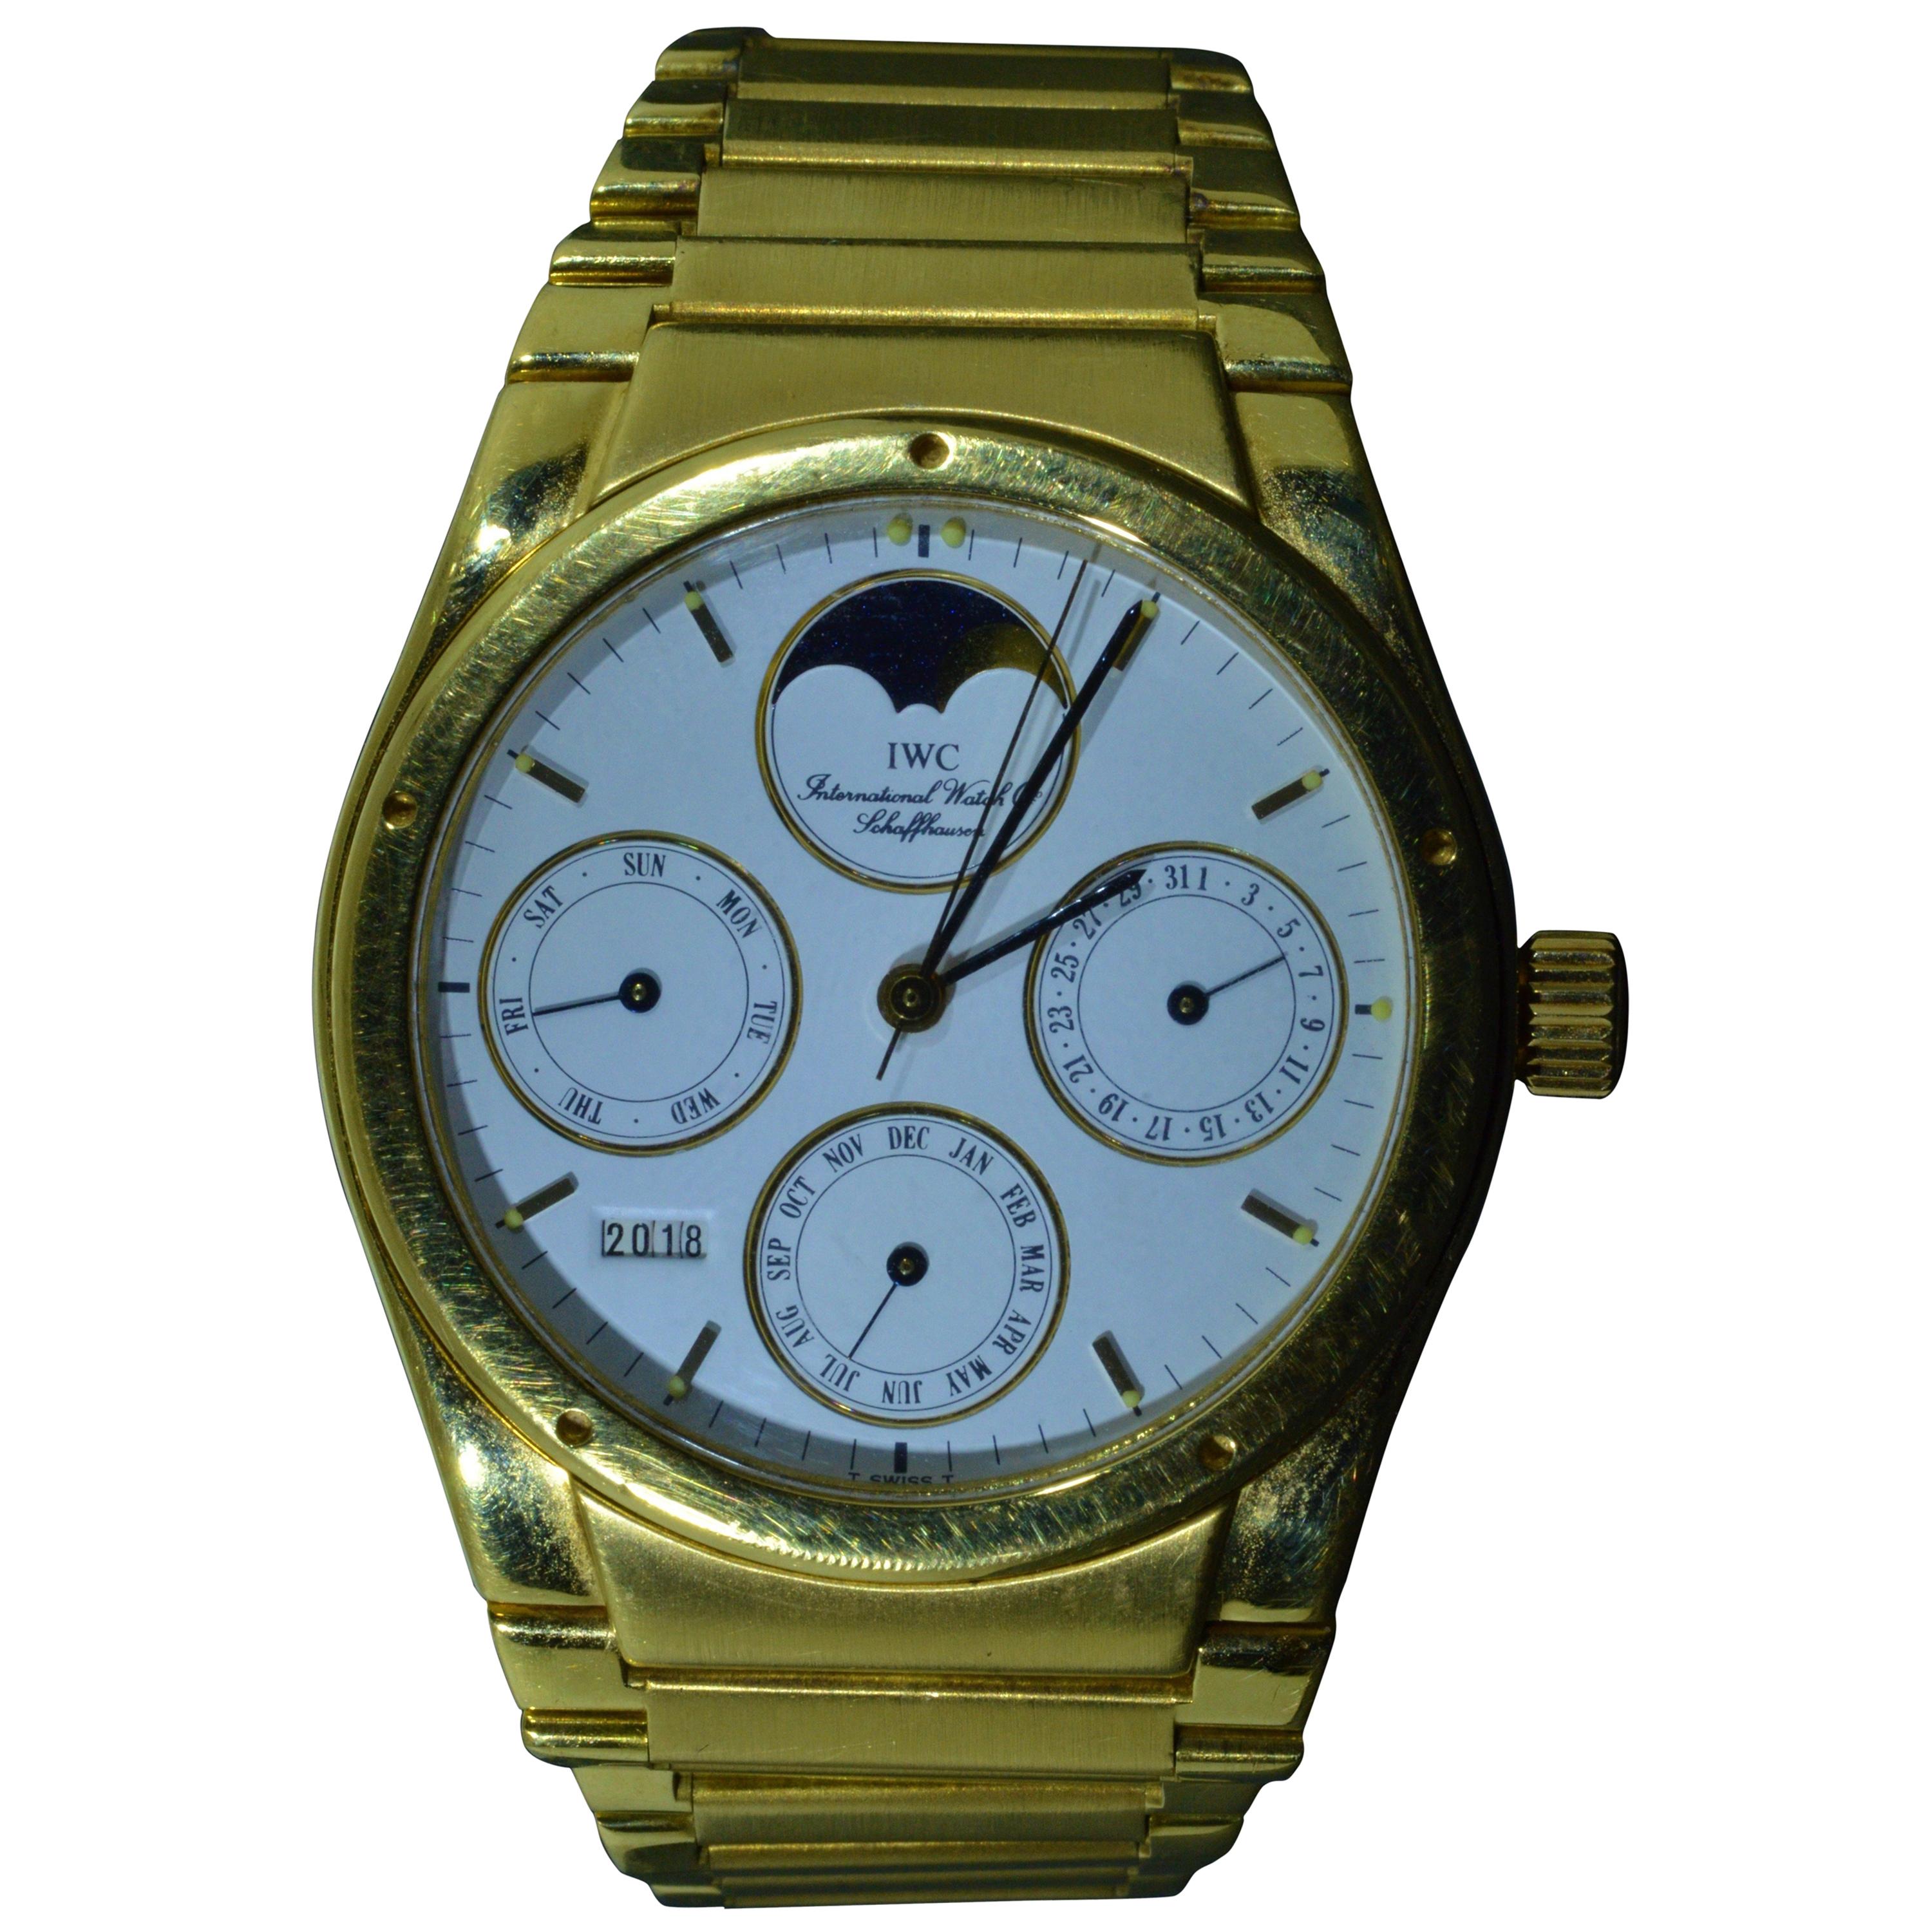 Fine 18 Karat Gold IWC Automatic Perpetual Calendar Wristwatch with Moon Phases For Sale